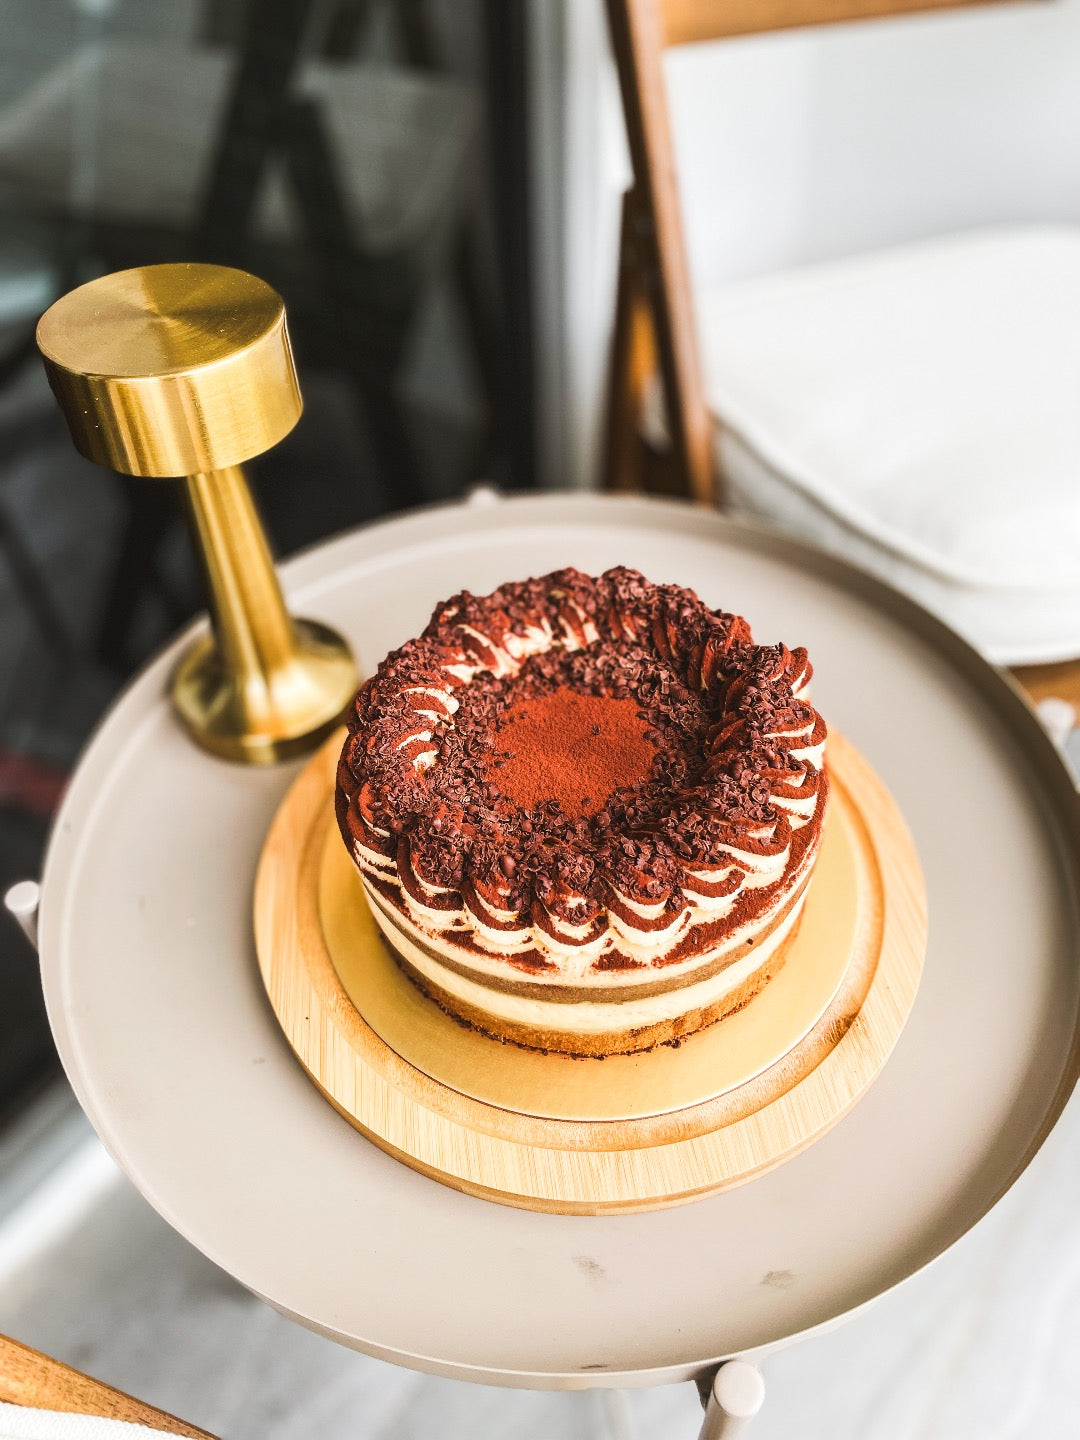 The marriage of rum and coffee liqueur creates an electrifying flavour profile that sets our tiramisu apart.